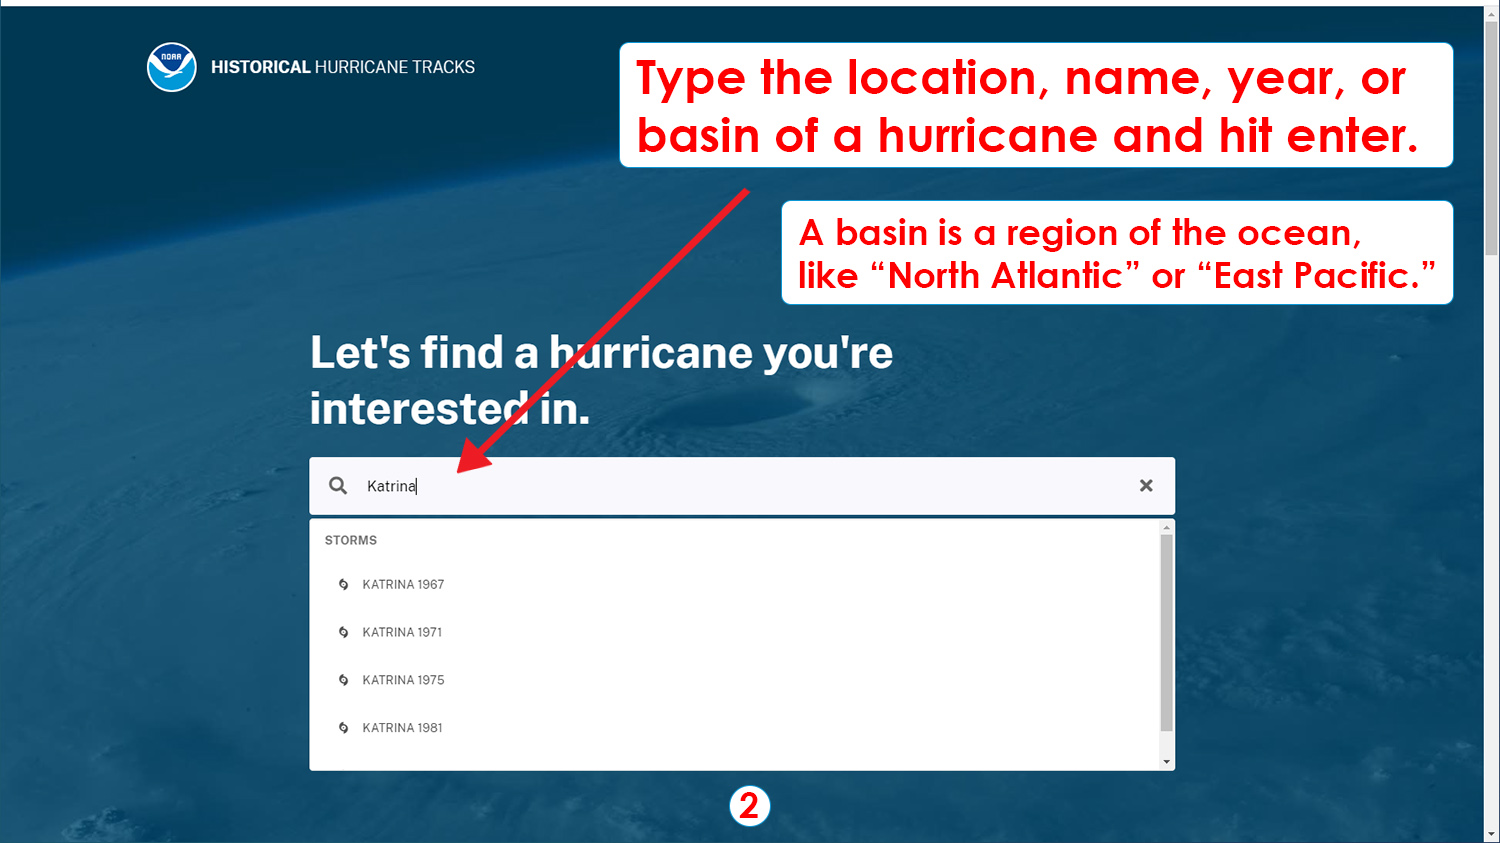 Step 2: Type the location, name, year, or basin of a hurricane and hit enter. A basin is a region of the ocean, like "North Atlantic" or "East Pacific."